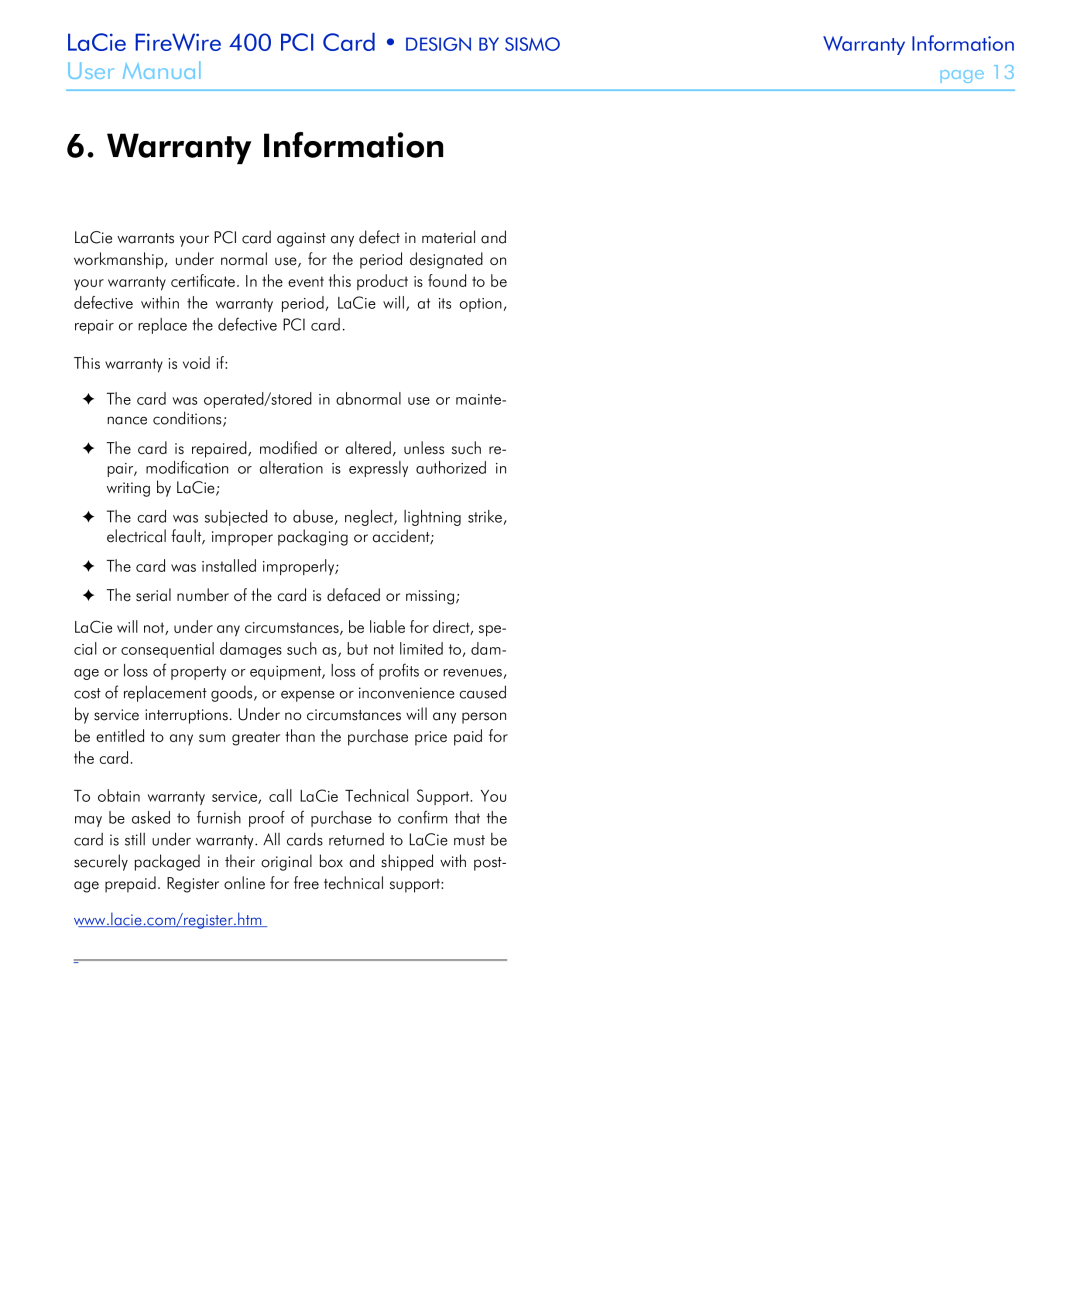 LaCie user manual Warranty Information, LaCie FireWire 400 PCI Card DESIGN BY SISMO, User Manual, page 